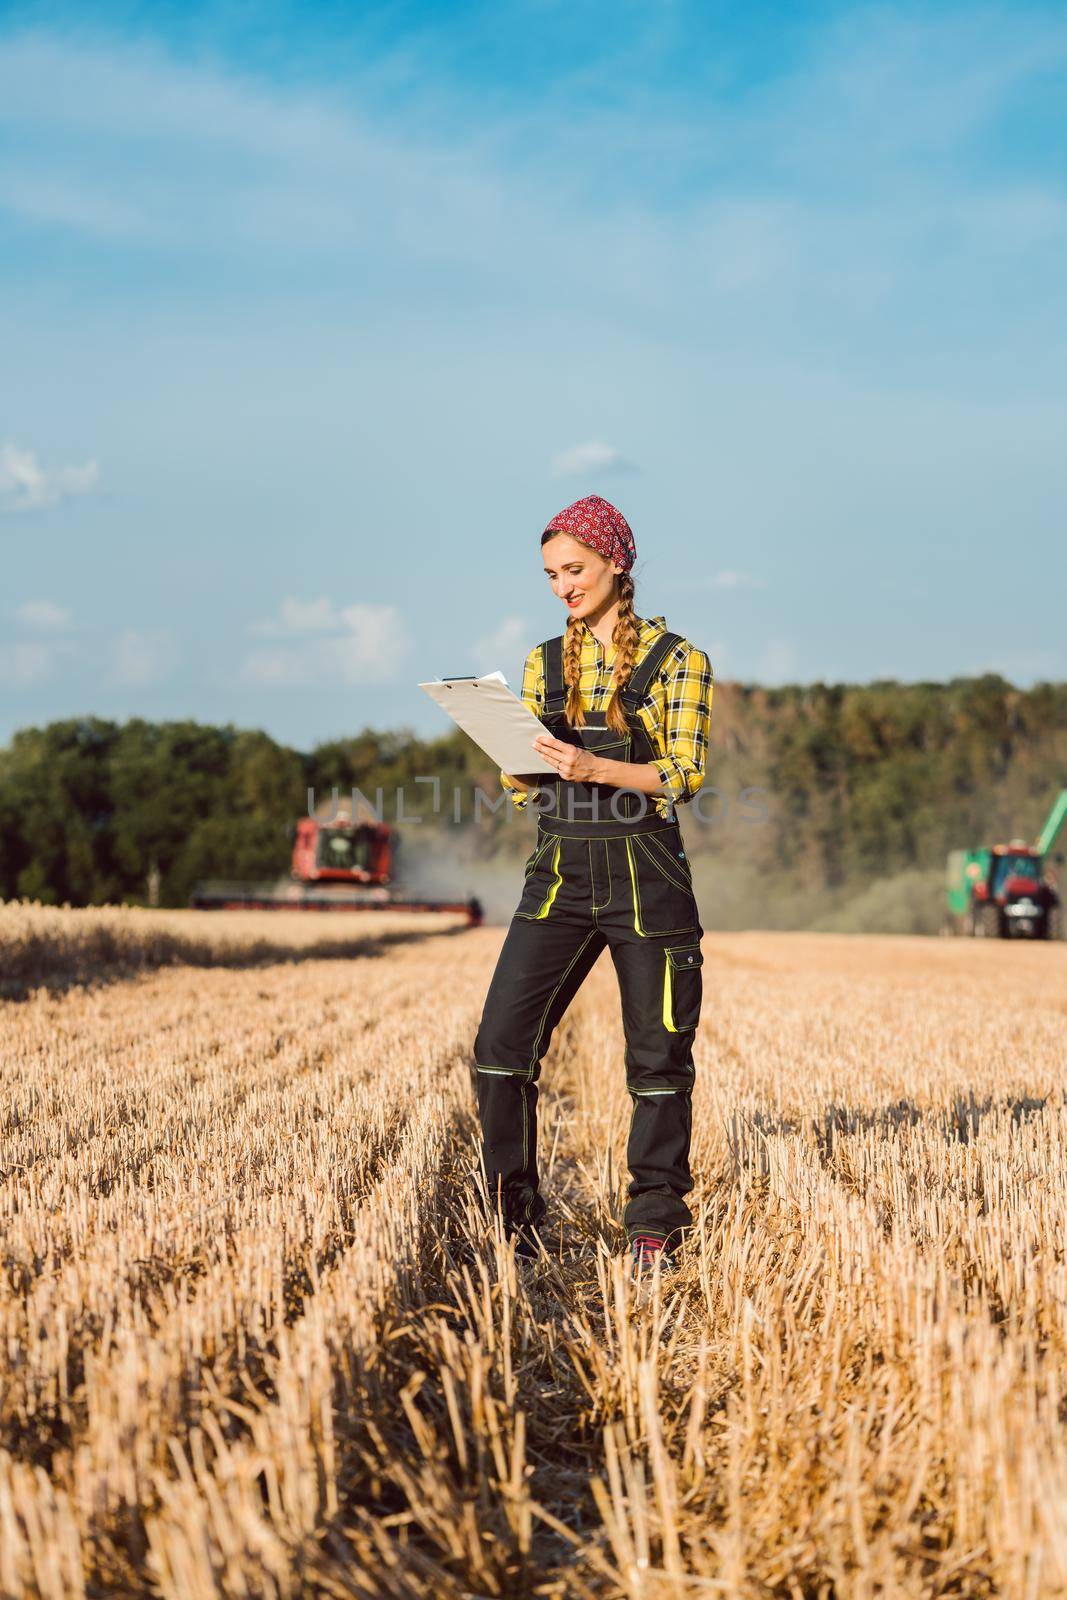 Farmer woman monitoring business progress of the harvest with agricultural machinery in the background